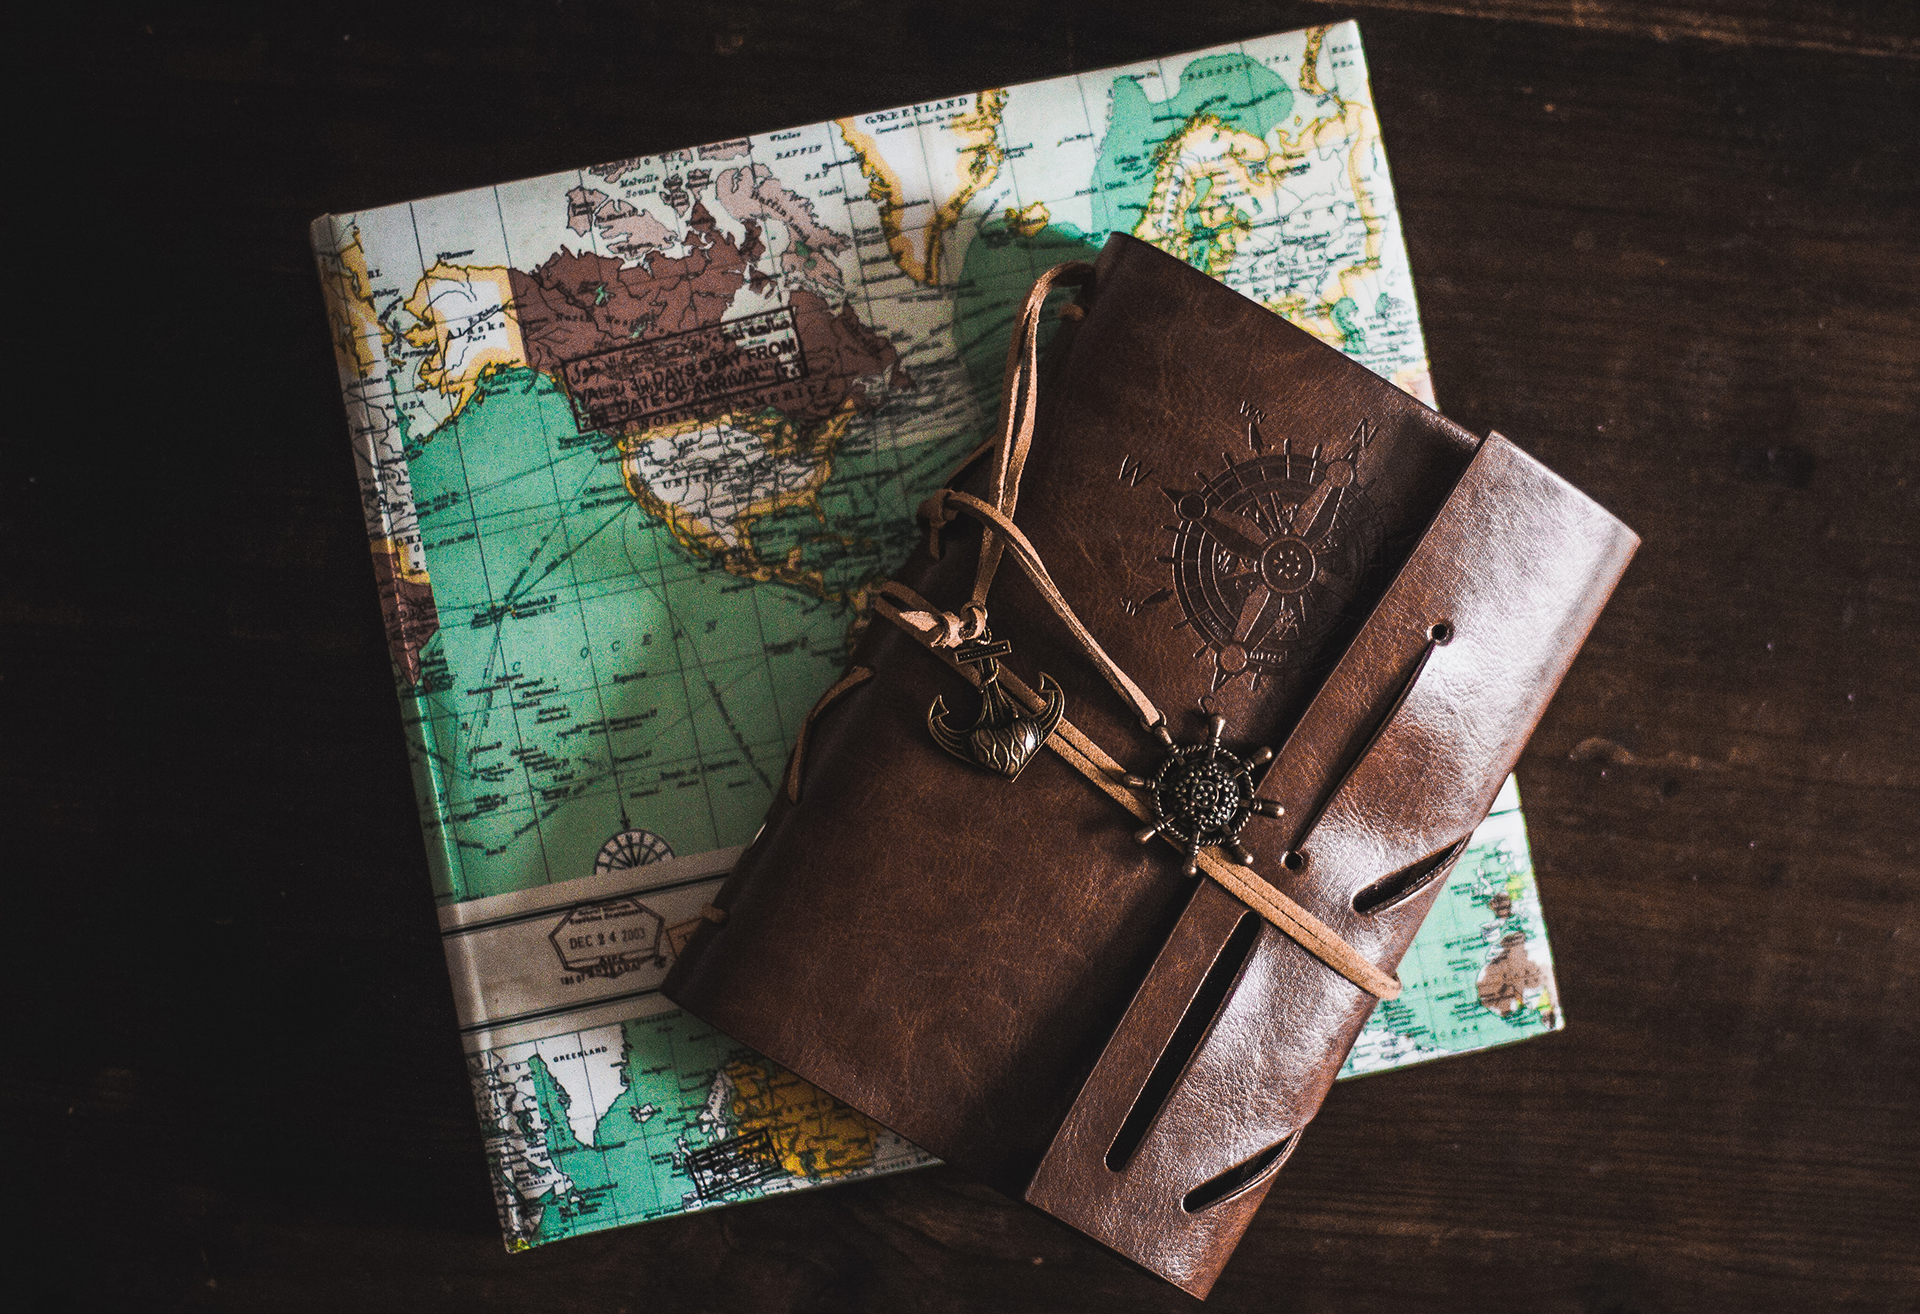 a gift wrapped in a map-print wrapping paper and a leather-bound journal with a compass on the cover